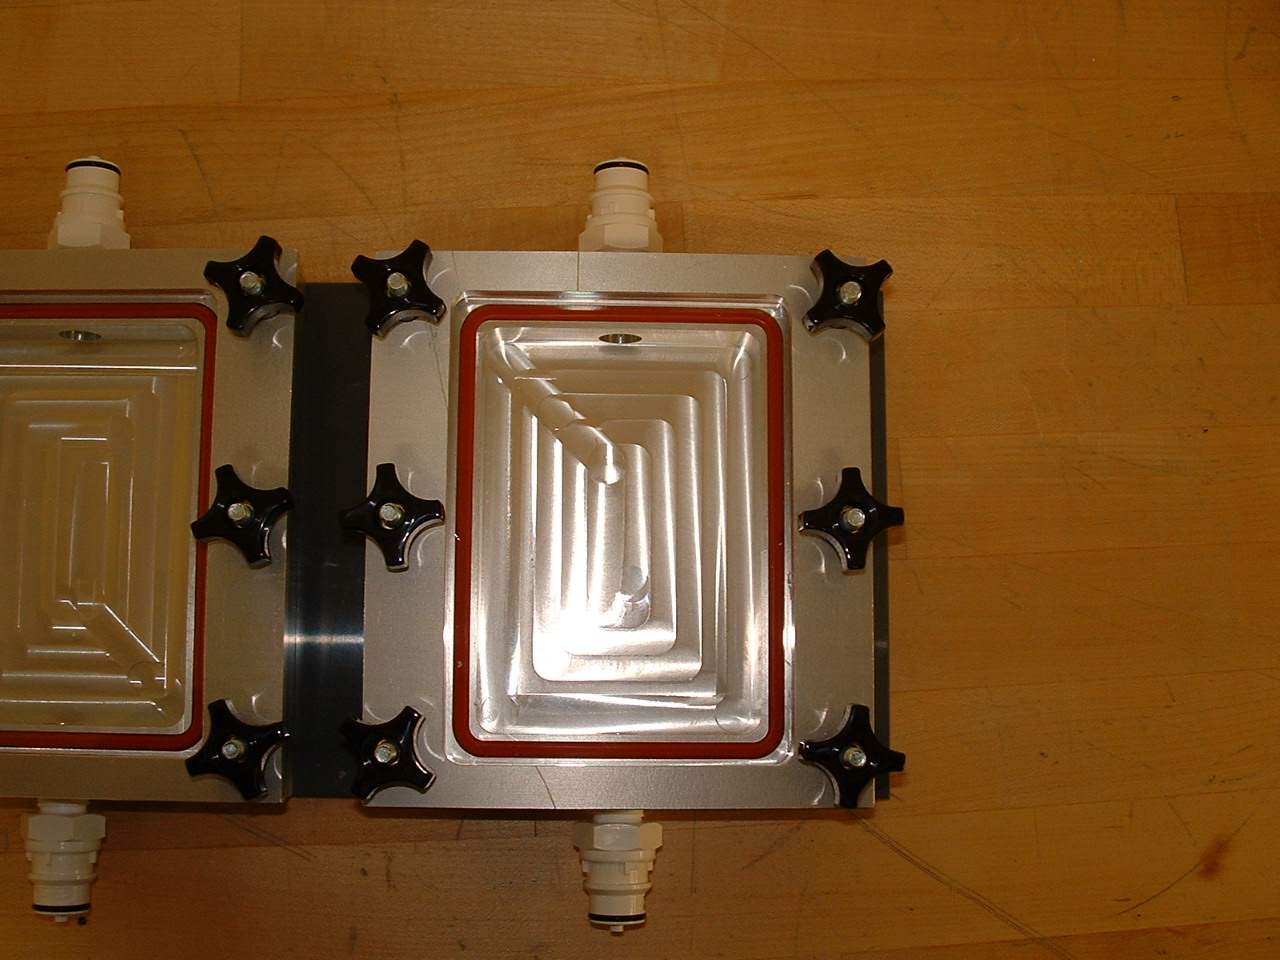 Chamber (one) - top view